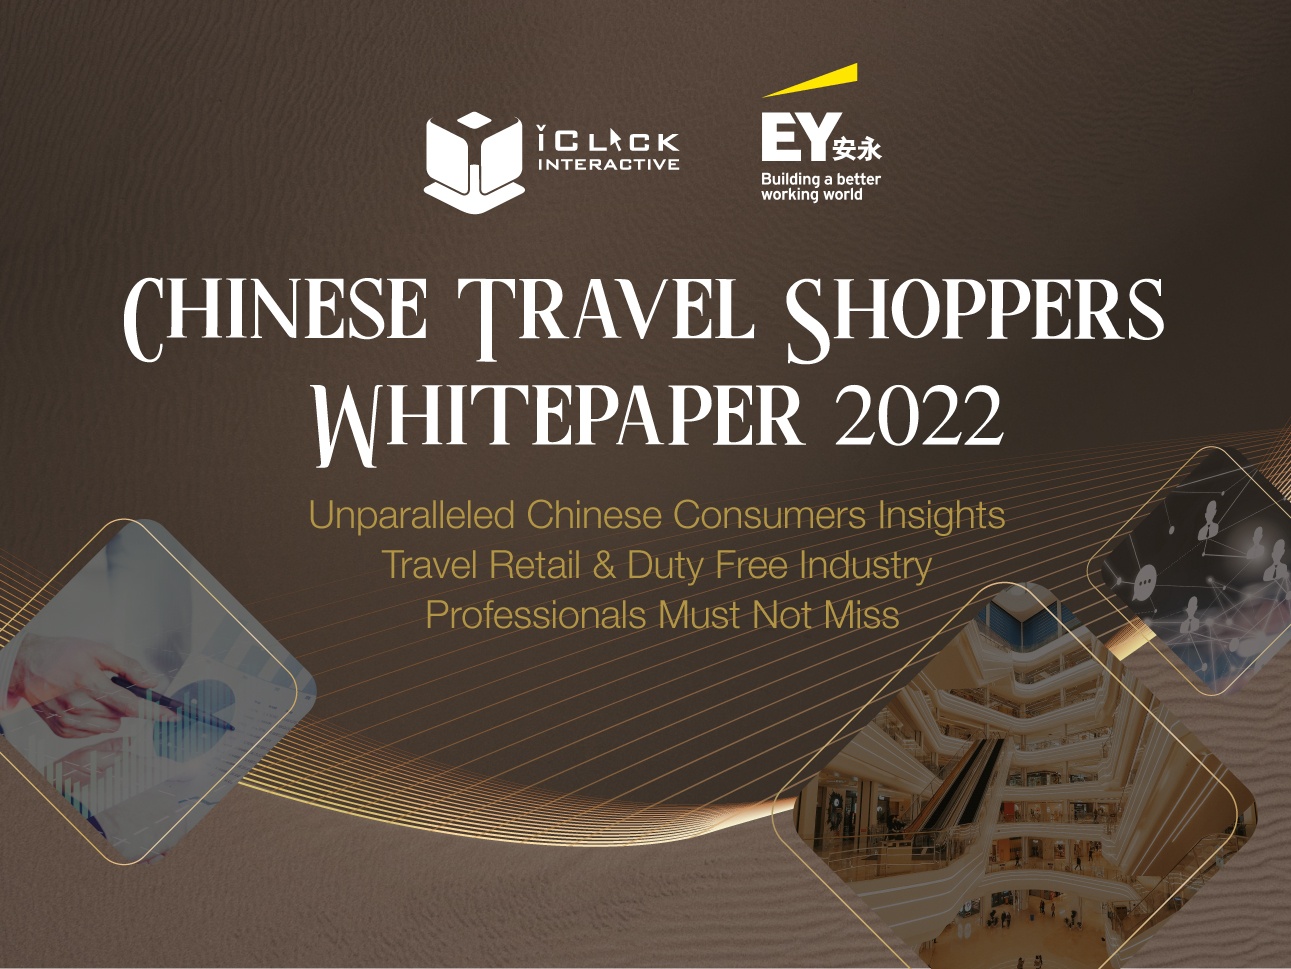 iClick and EY Launched the Chinese Travel Shoppers 2022 Whitepaper